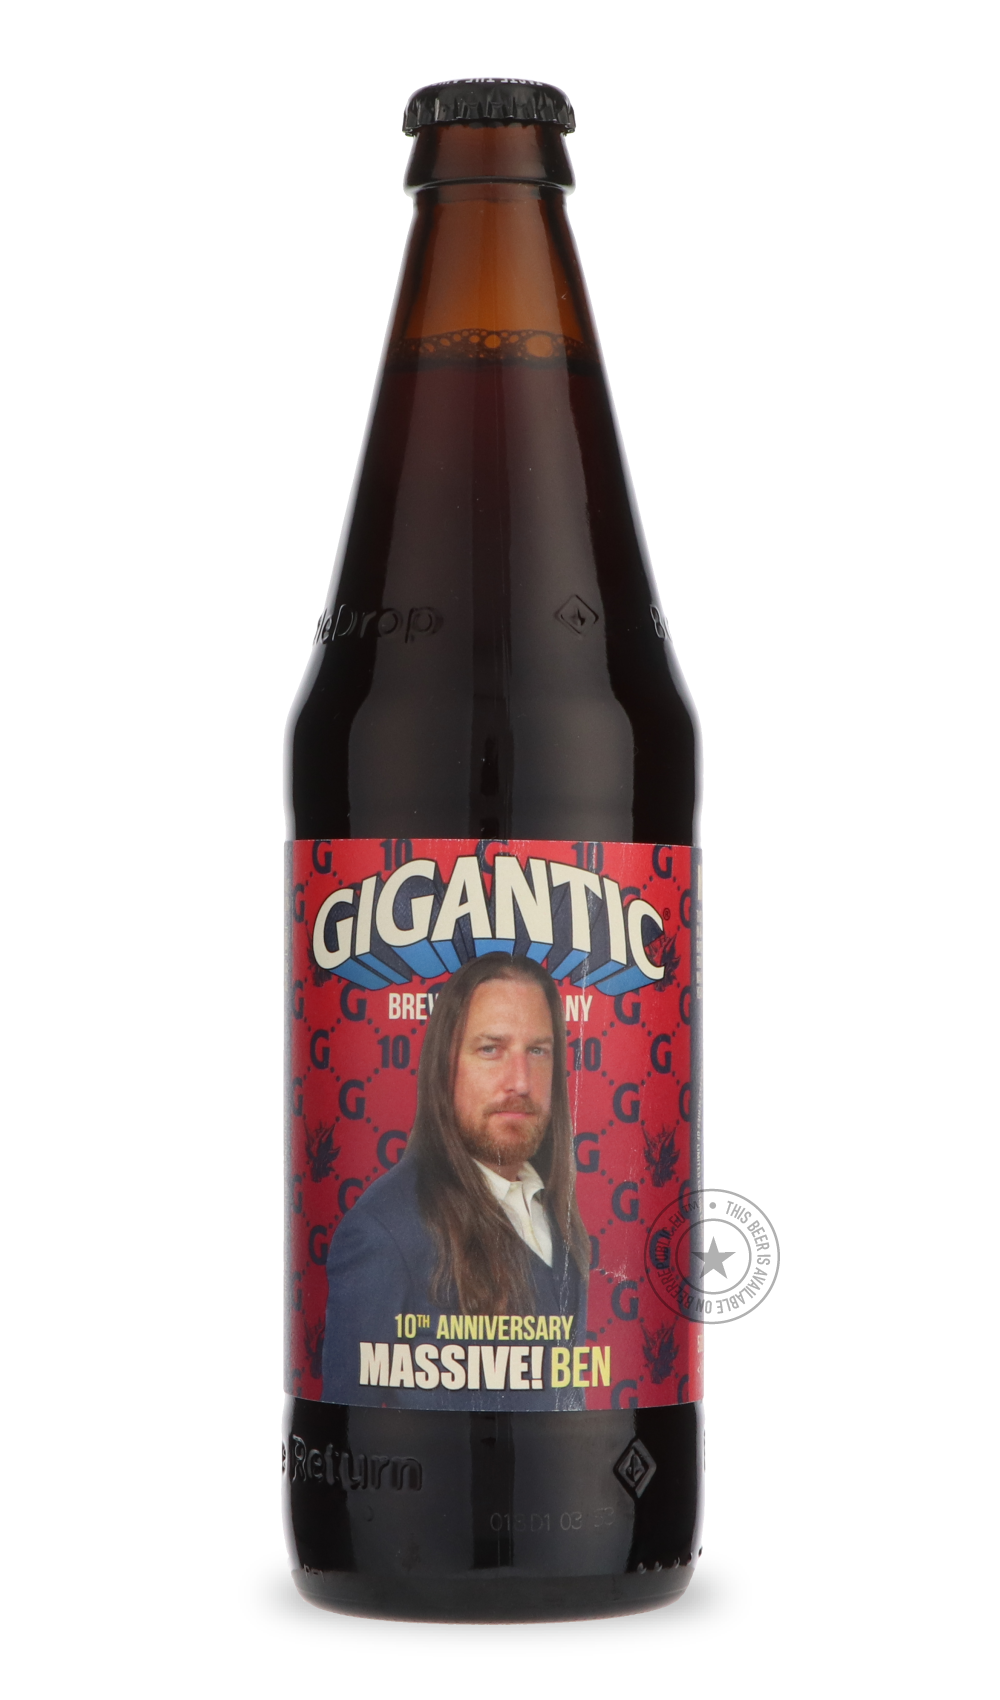 -Gigantic- 10th Anniversary Massive! Ben-Brown & Dark- Only @ Beer Republic - The best online beer store for American & Canadian craft beer - Buy beer online from the USA and Canada - Bier online kopen - Amerikaans bier kopen - Craft beer store - Craft beer kopen - Amerikanisch bier kaufen - Bier online kaufen - Acheter biere online - IPA - Stout - Porter - New England IPA - Hazy IPA - Imperial Stout - Barrel Aged - Barrel Aged Imperial Stout - Brown - Dark beer - Blond - Blonde - Pilsner - Lager - Wheat - 